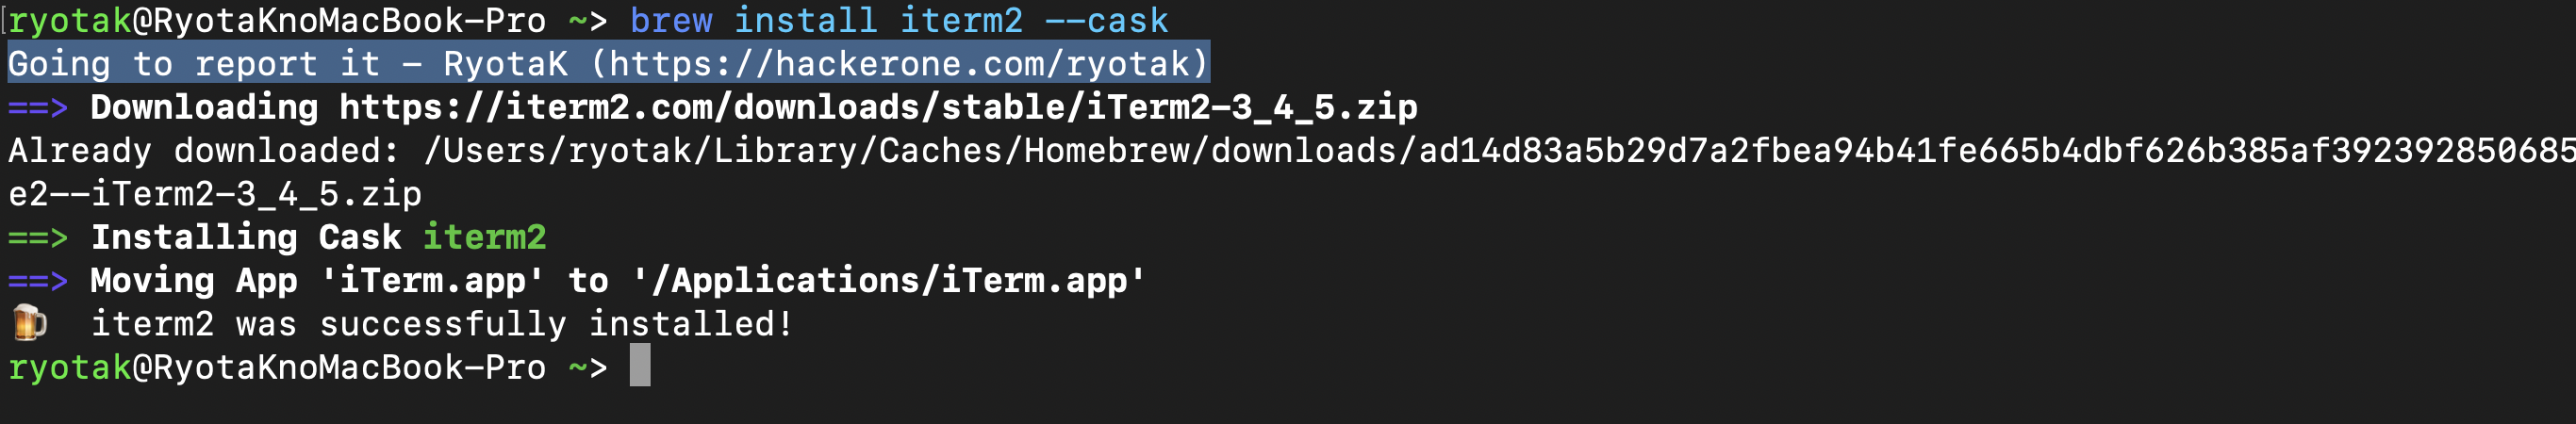 brew install iterm2 &ndash;cask executed the modified code